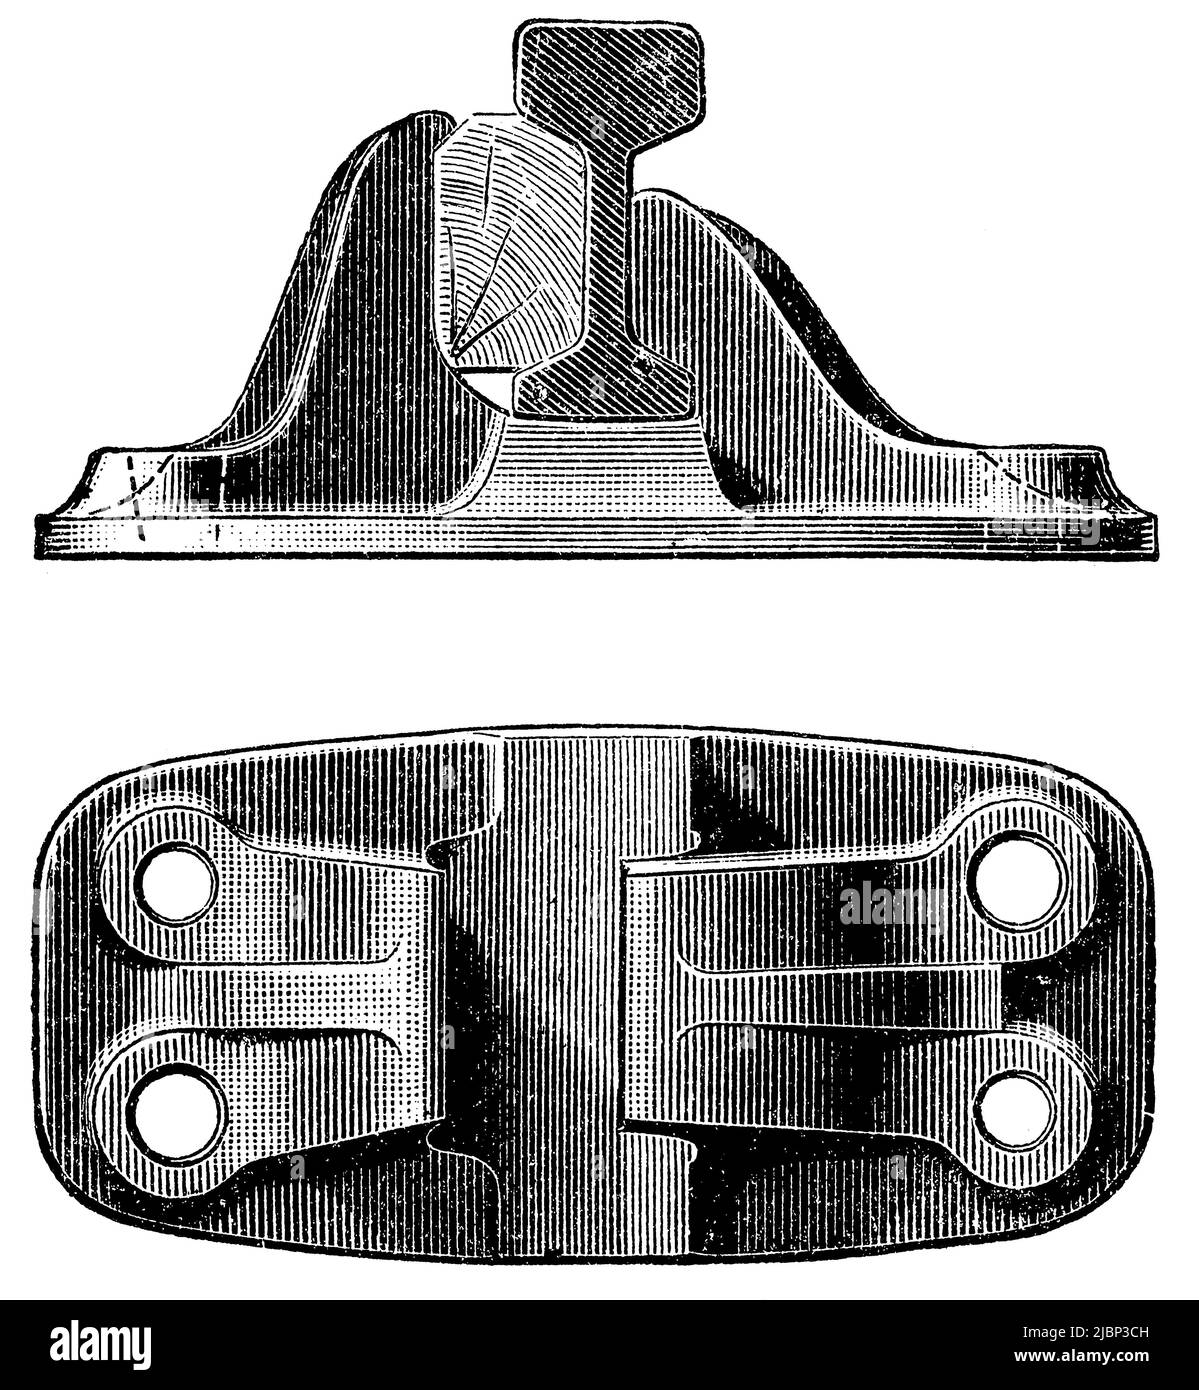 Rail chair, top and side view. Publication of the book 'Meyers Konversations-Lexikon', Volume 2, Leipzig, Germany, 1910 Stock Photo